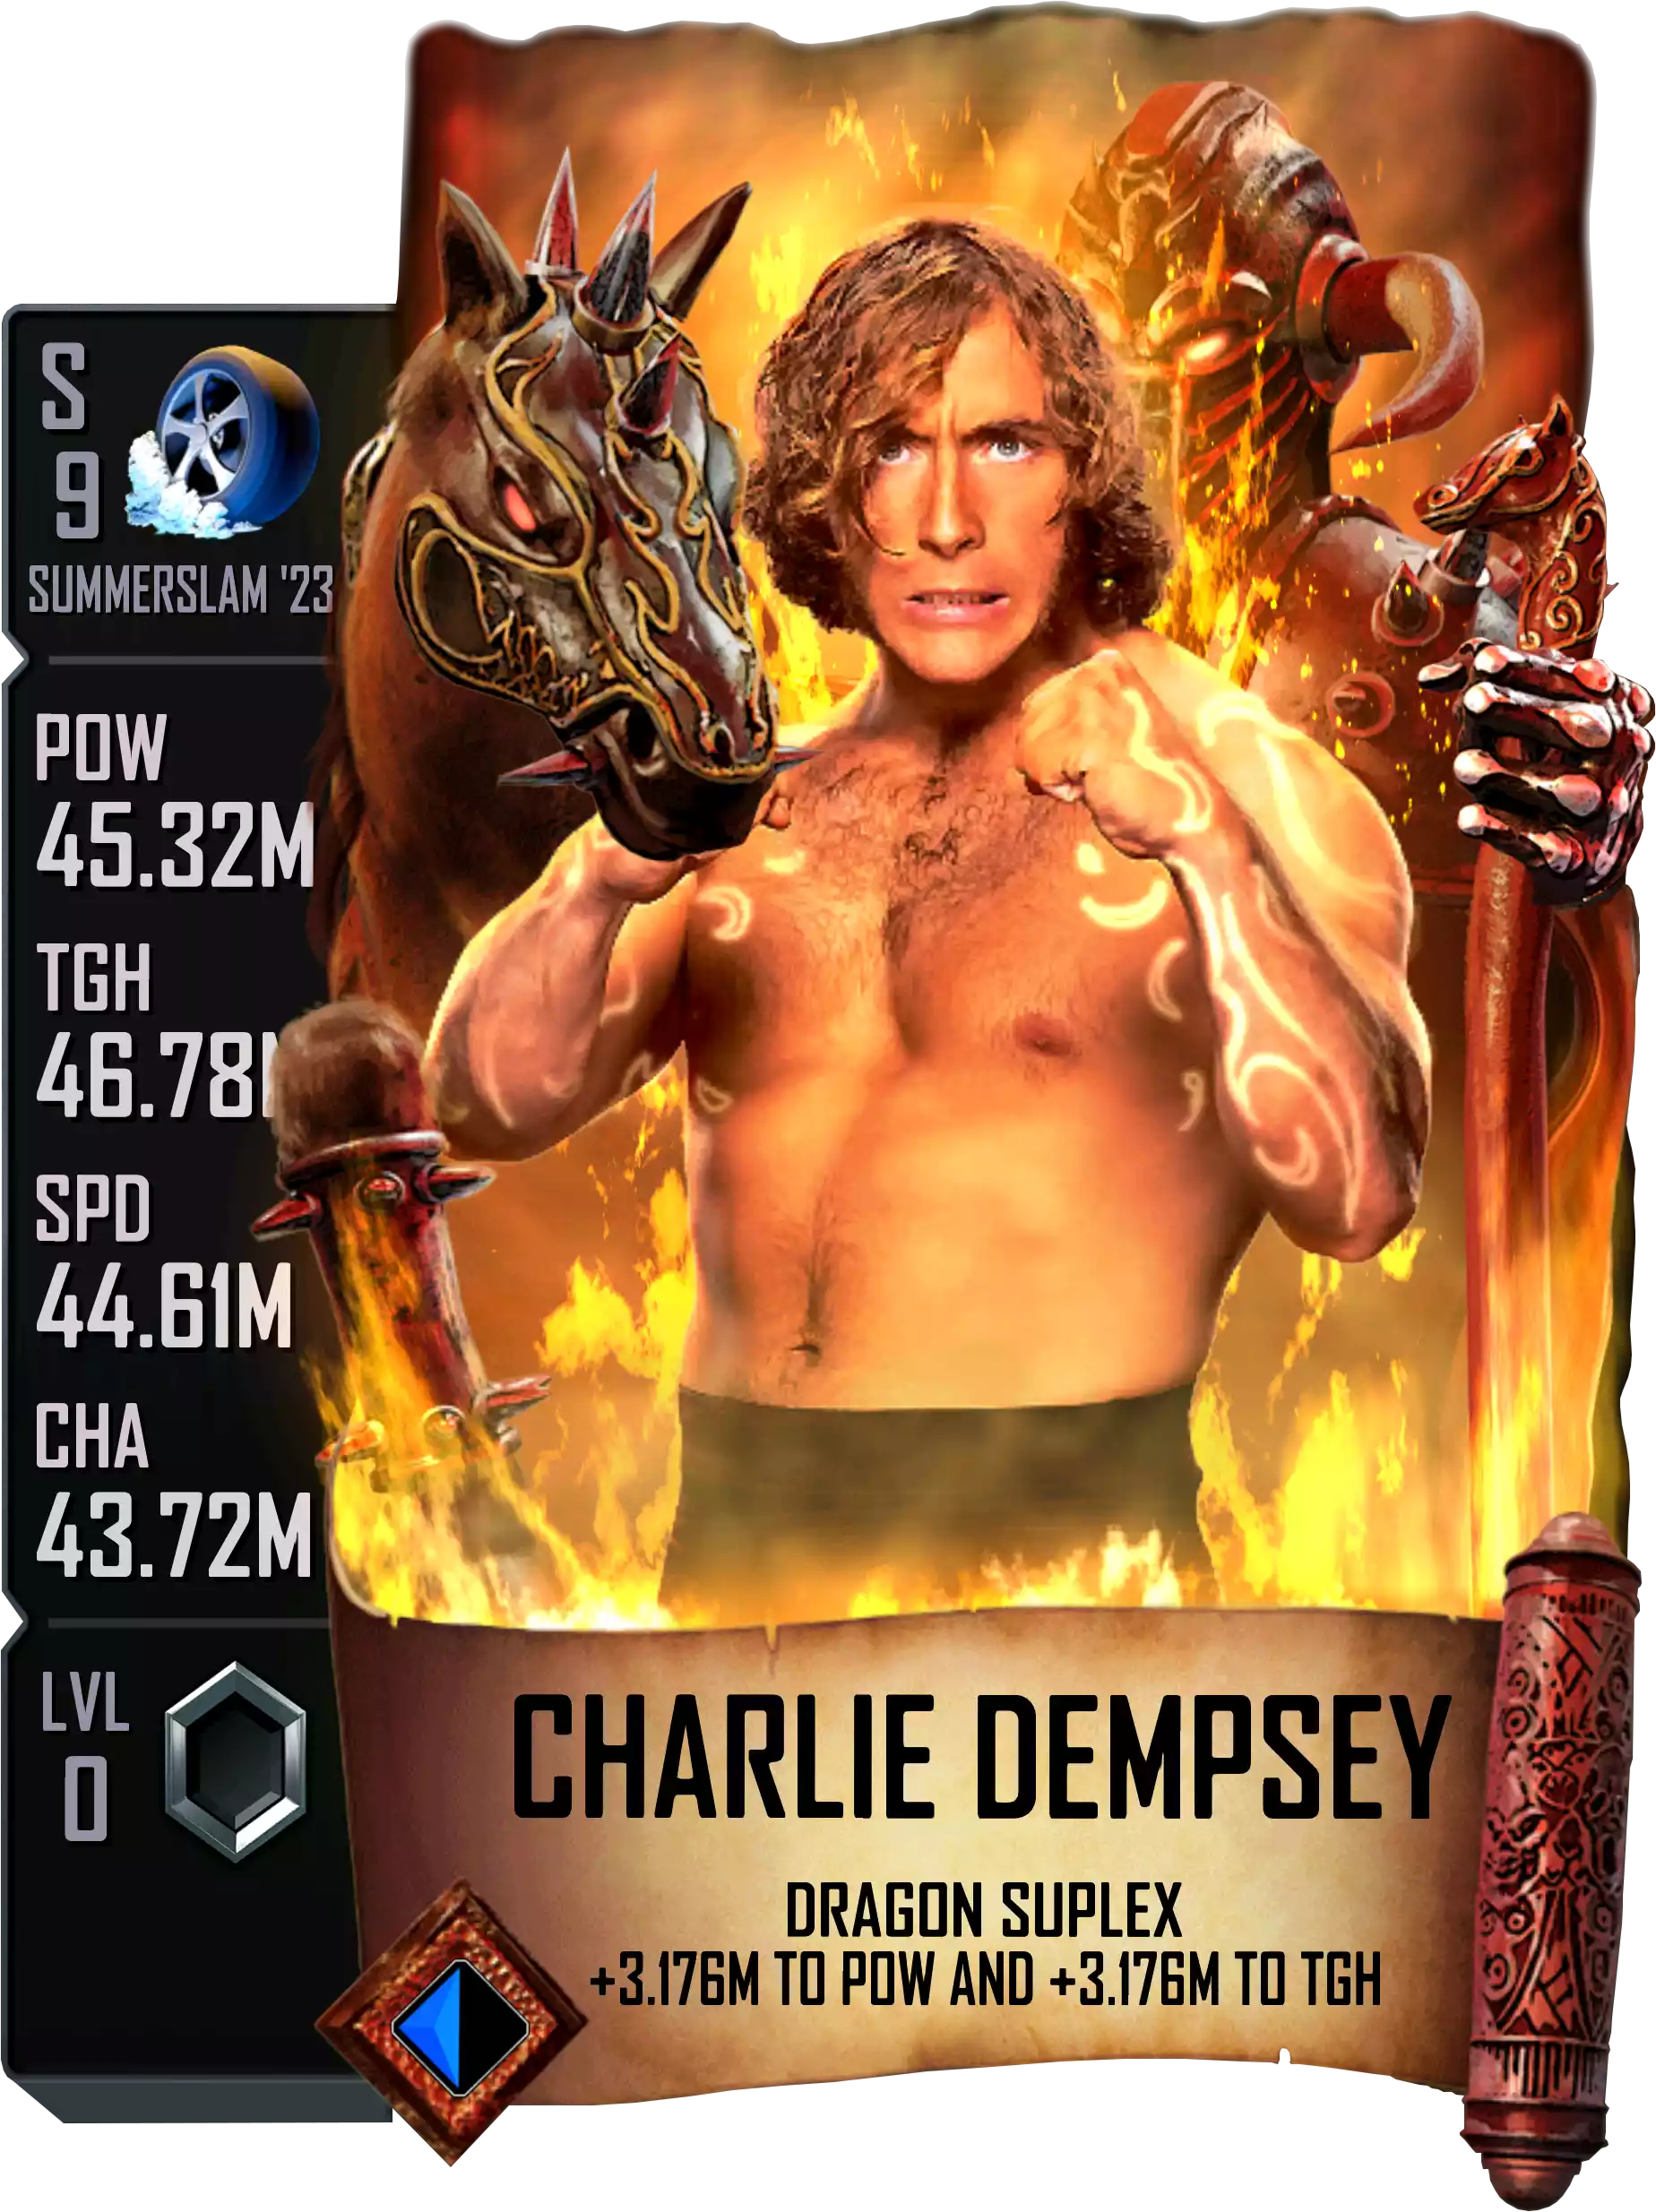 SS23 (SummerSlam '23) - Charlie Dempsey Special Seasonal Halloween Card from WWE Supercard